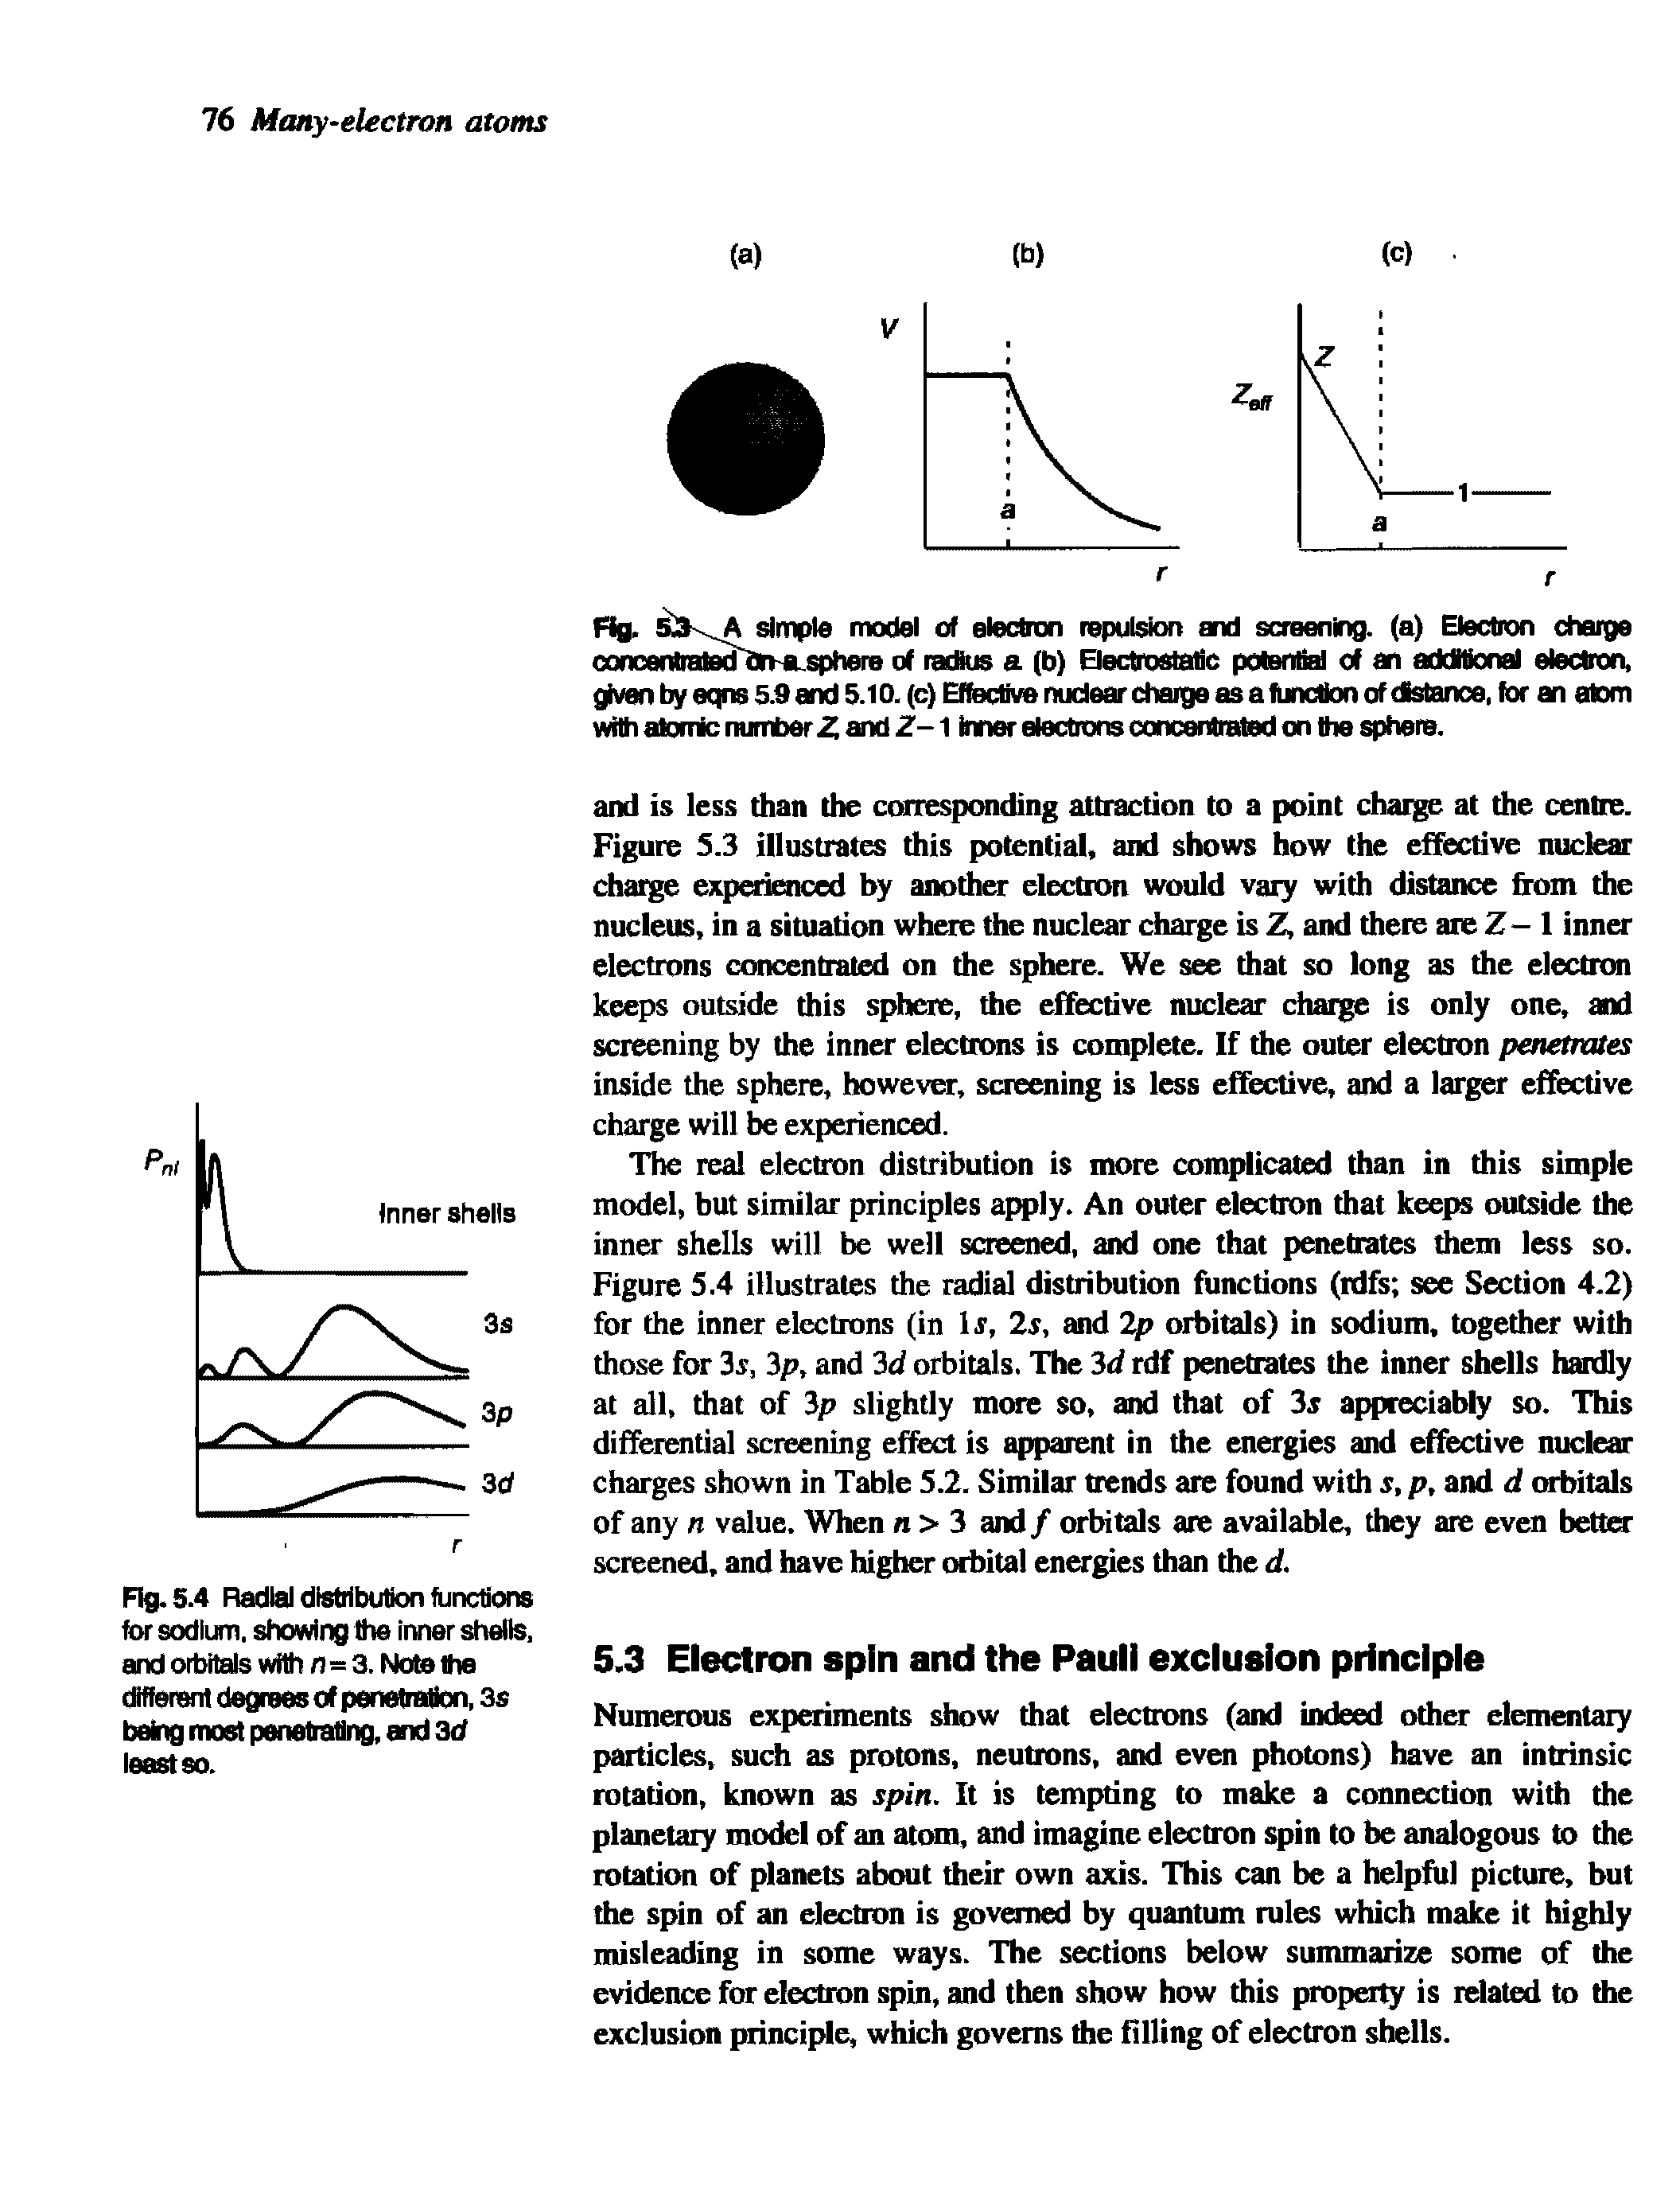 Fig. 5 A simple model of electron repulsion and screening, (a) Electron charge concentrated firt a sphere of radius a (b) Electrostatic potential of an additional electron, given by eqns 5.9 and 5.10. (c) Effective nuclear charge as a function of clstance, for an atom with atomic number Z and Z-1 hner electrons concentrated on the sphere.